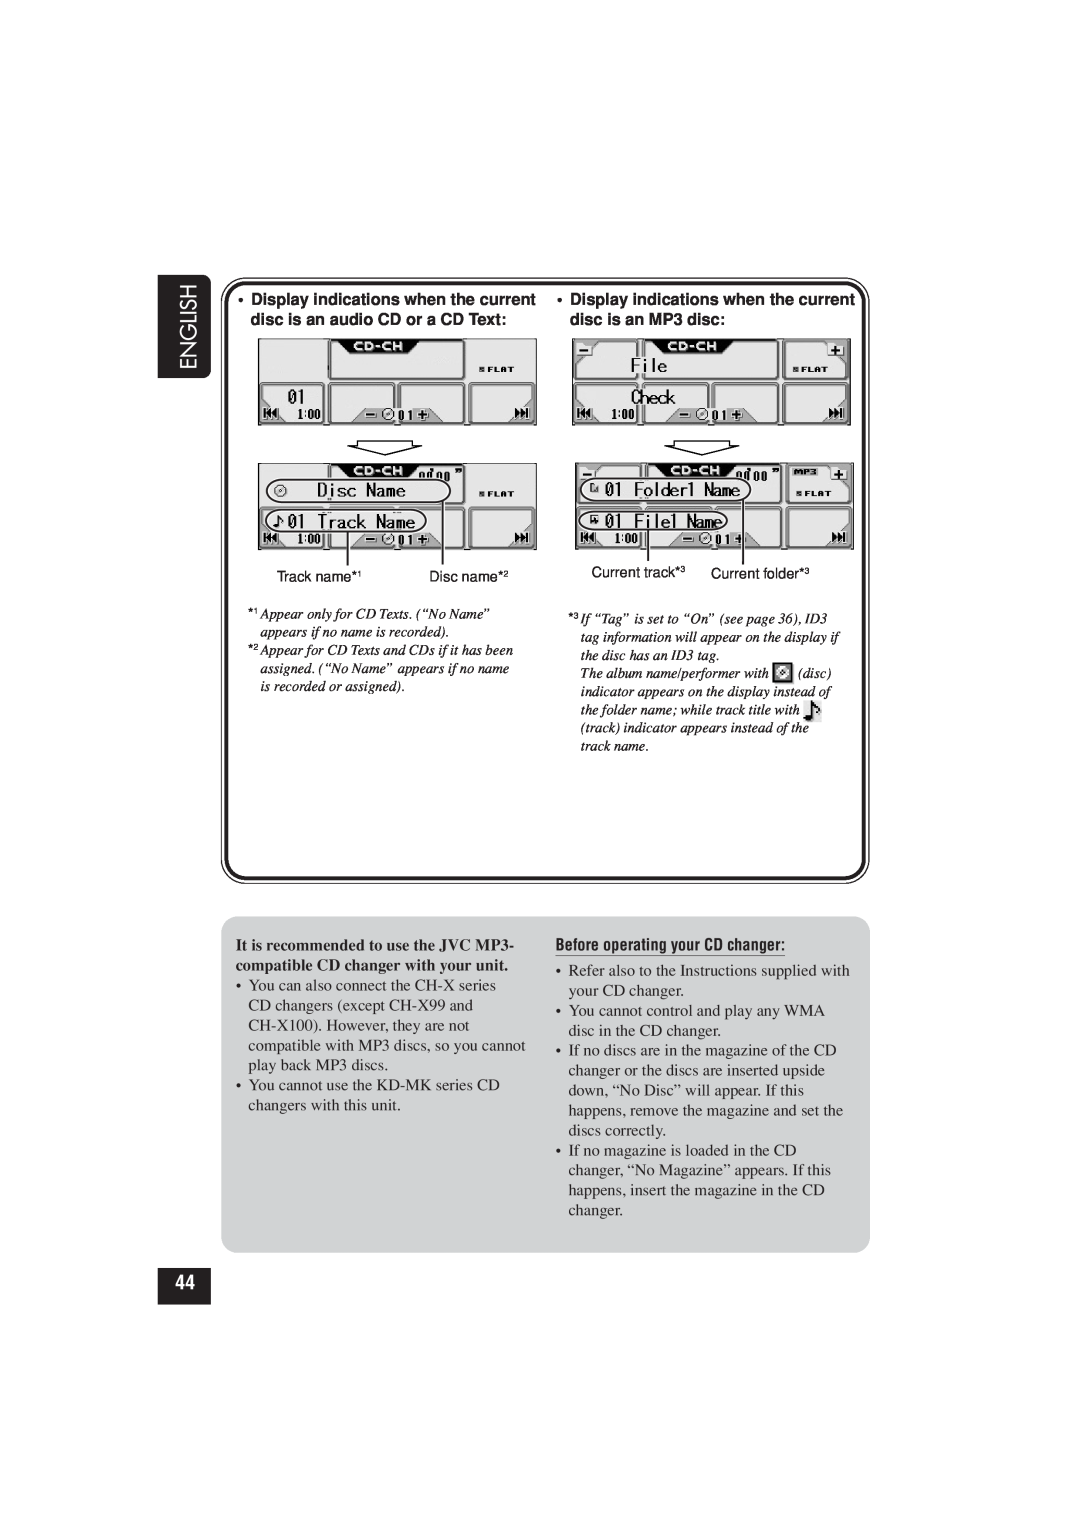 JVC KD-LHX502 manual English, • Display indications when the current, disc is an audio CD or a CD Text, disc is an MP3 disc 